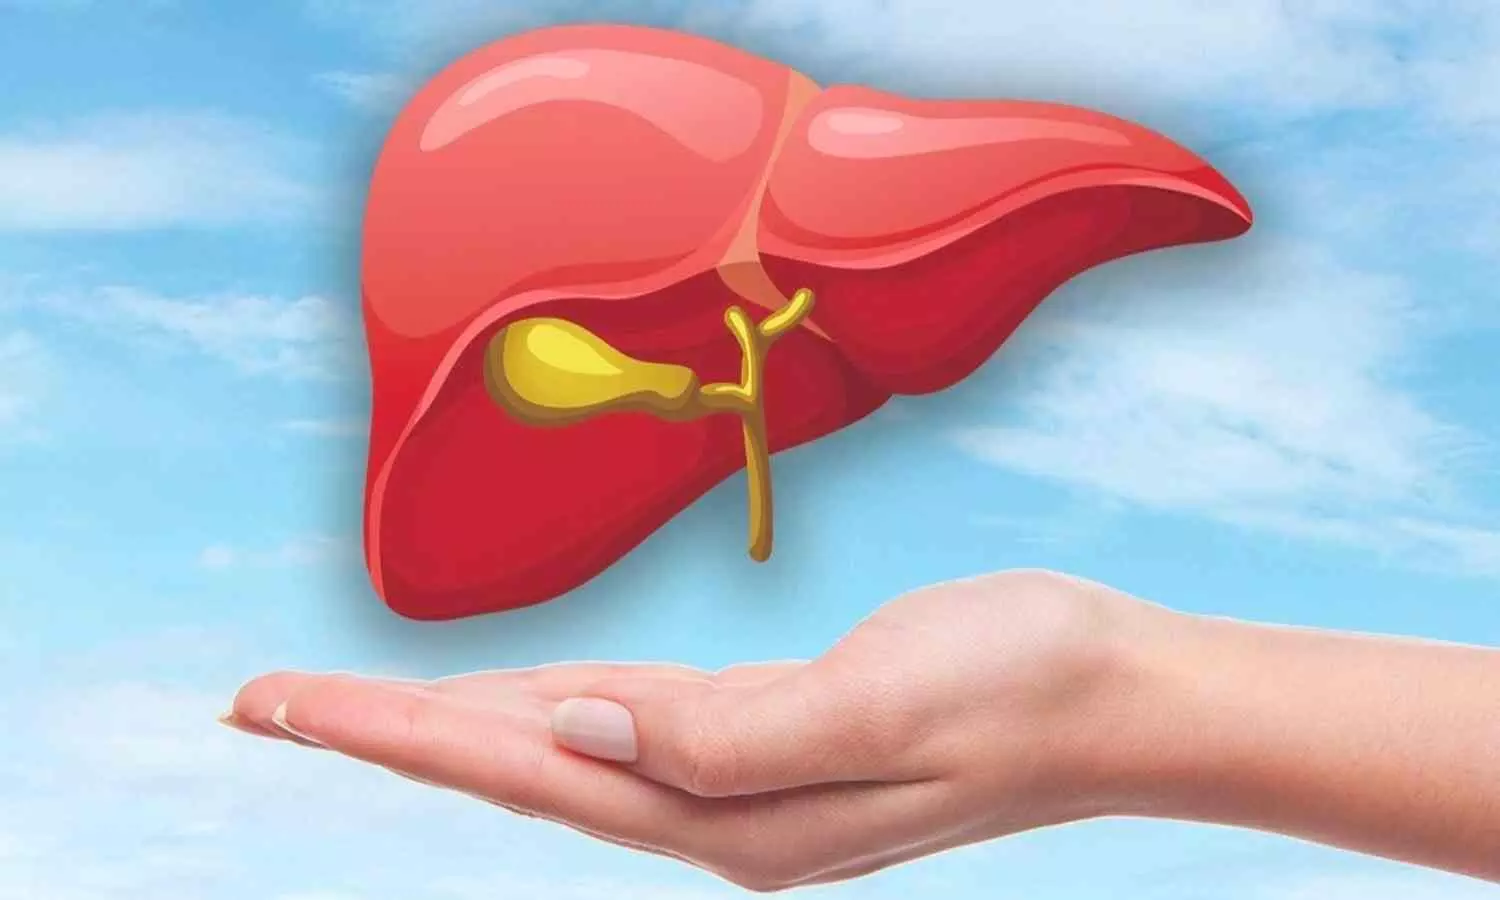 Homemade Remedies For Liver Damage